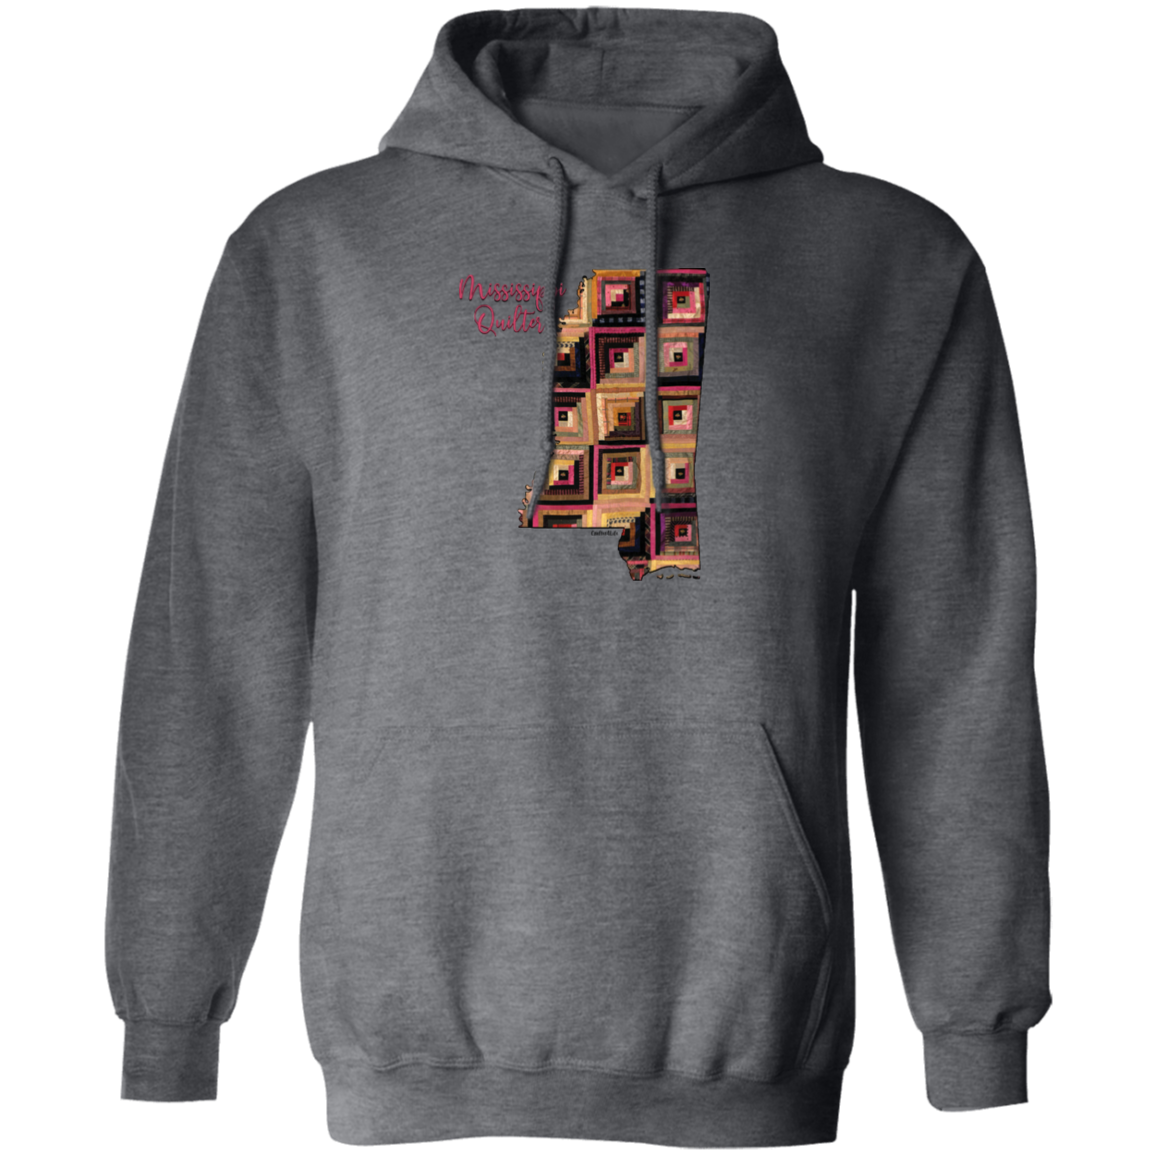 Mississippi Quilter Pullover Hoodie, Gift for Quilting Friends and Family